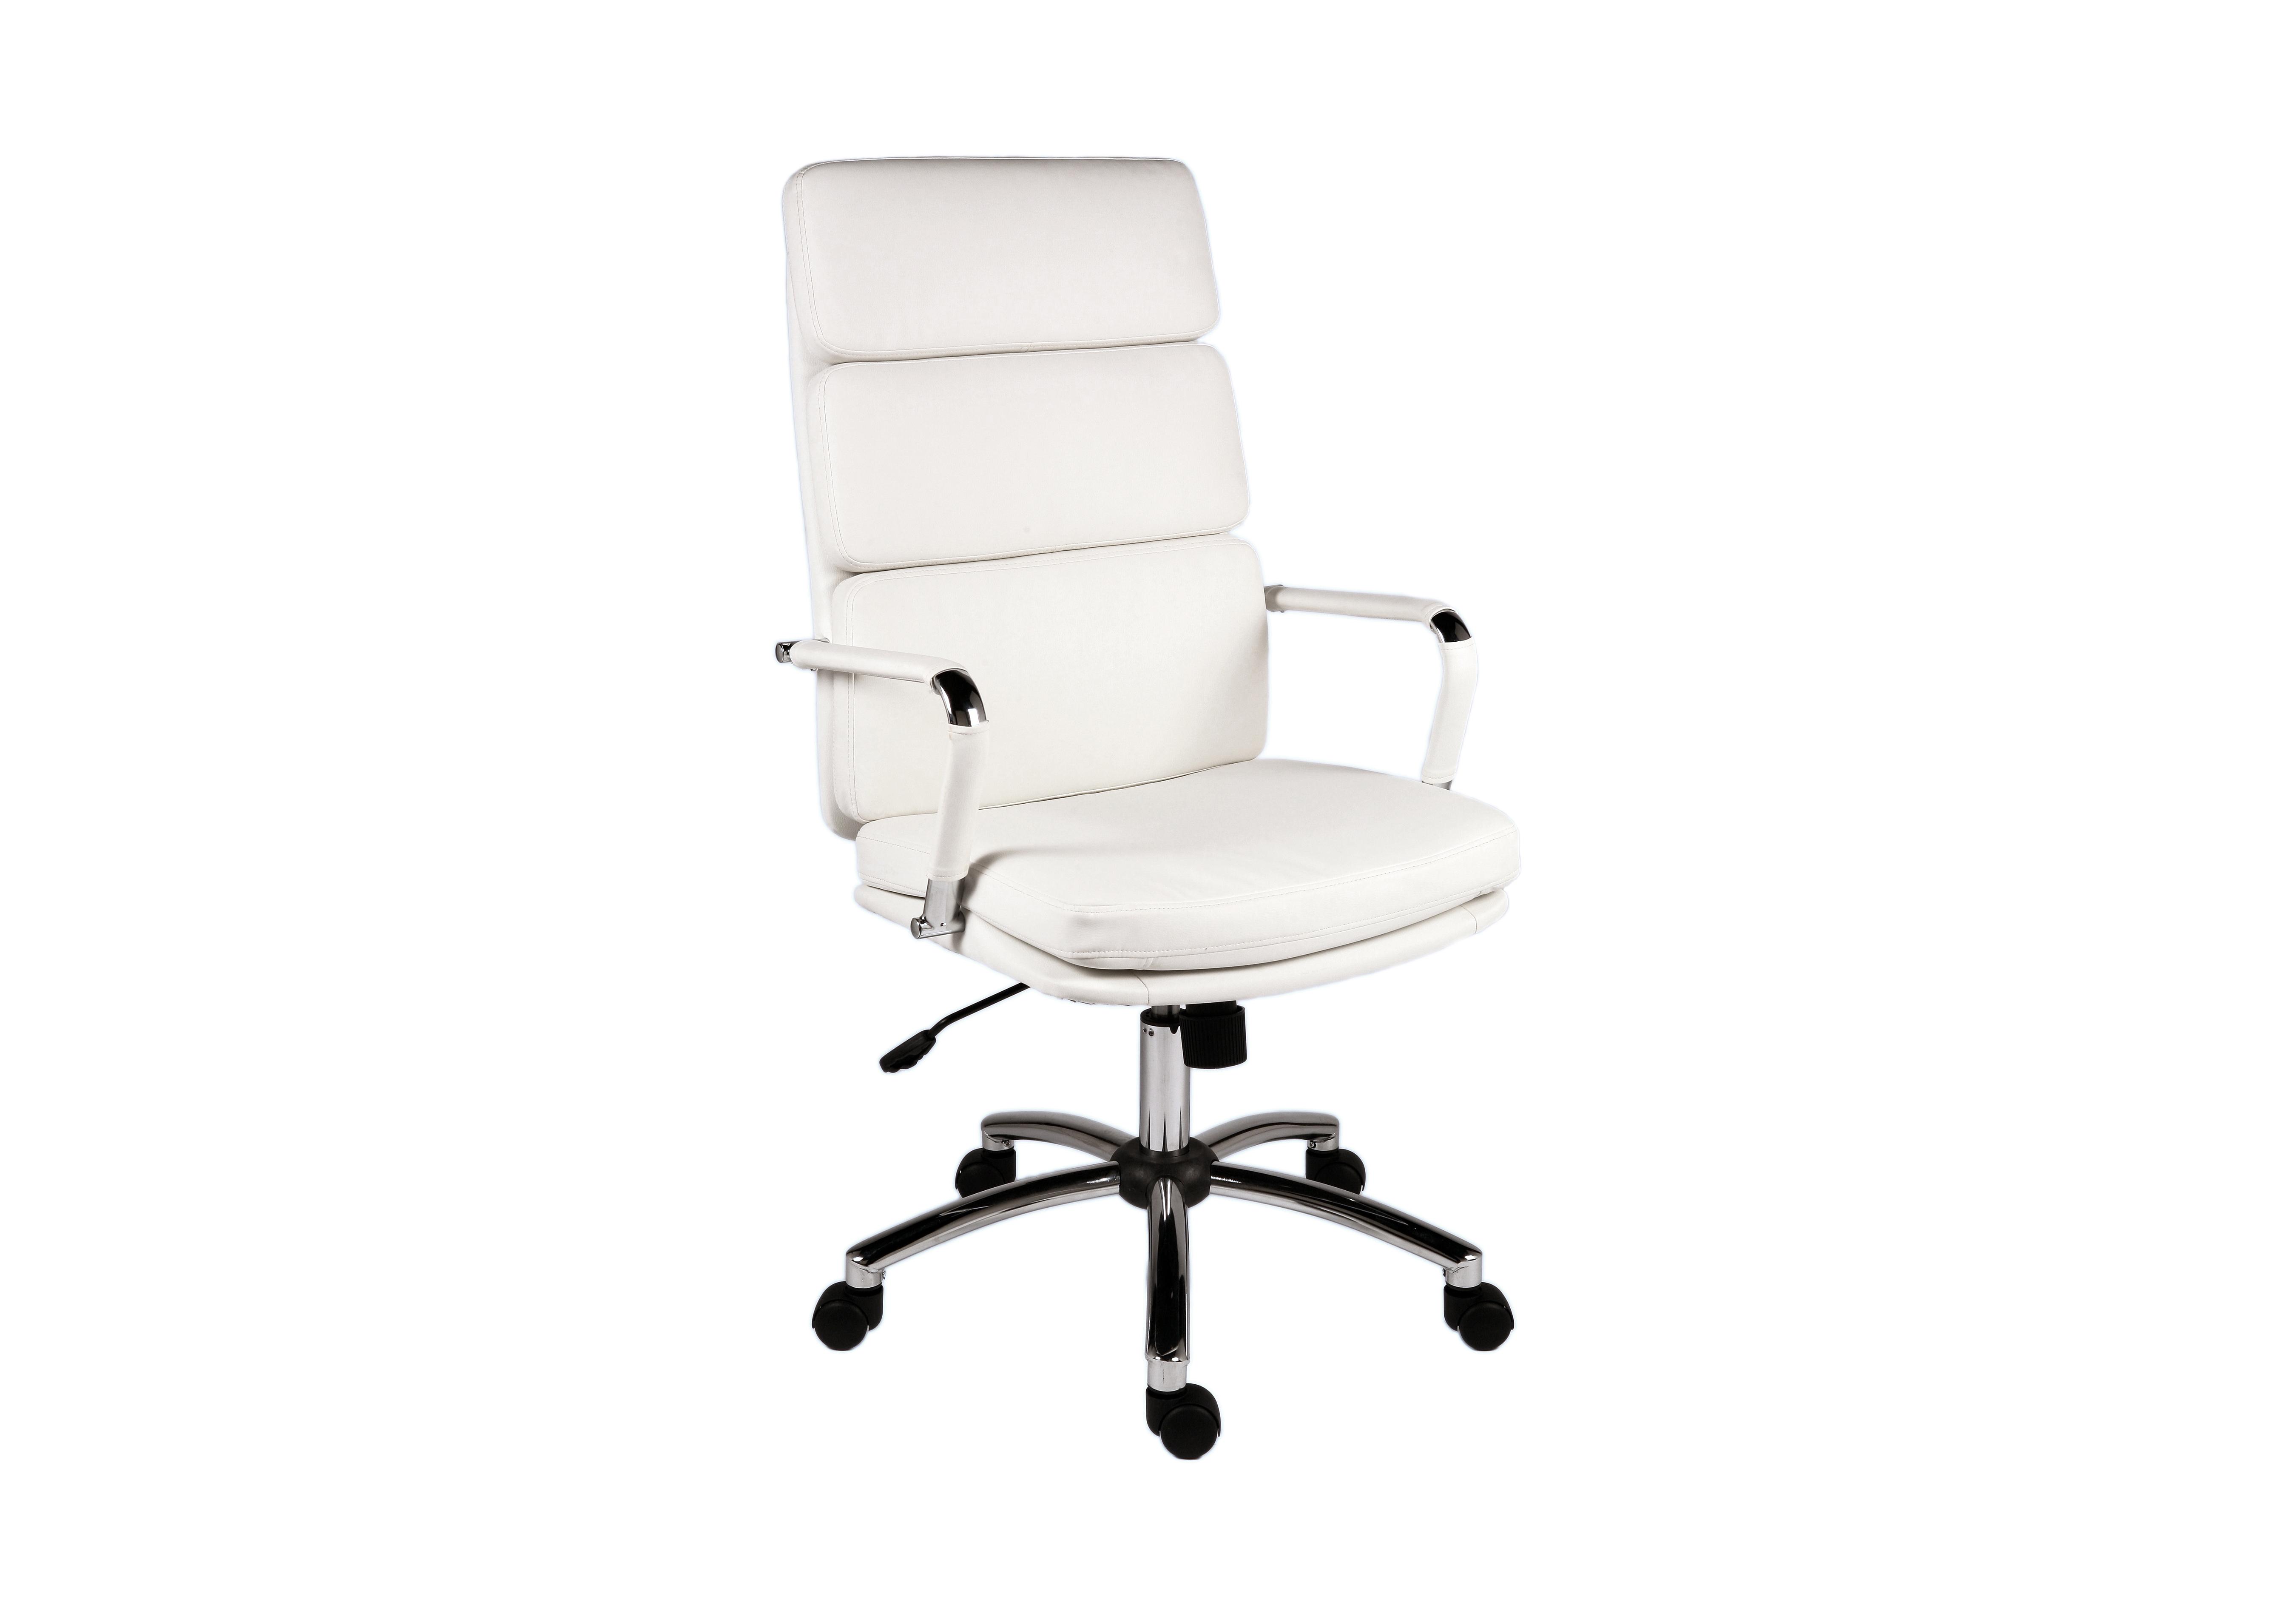 East River Pier 15 Office Chair in White on Furniture Village